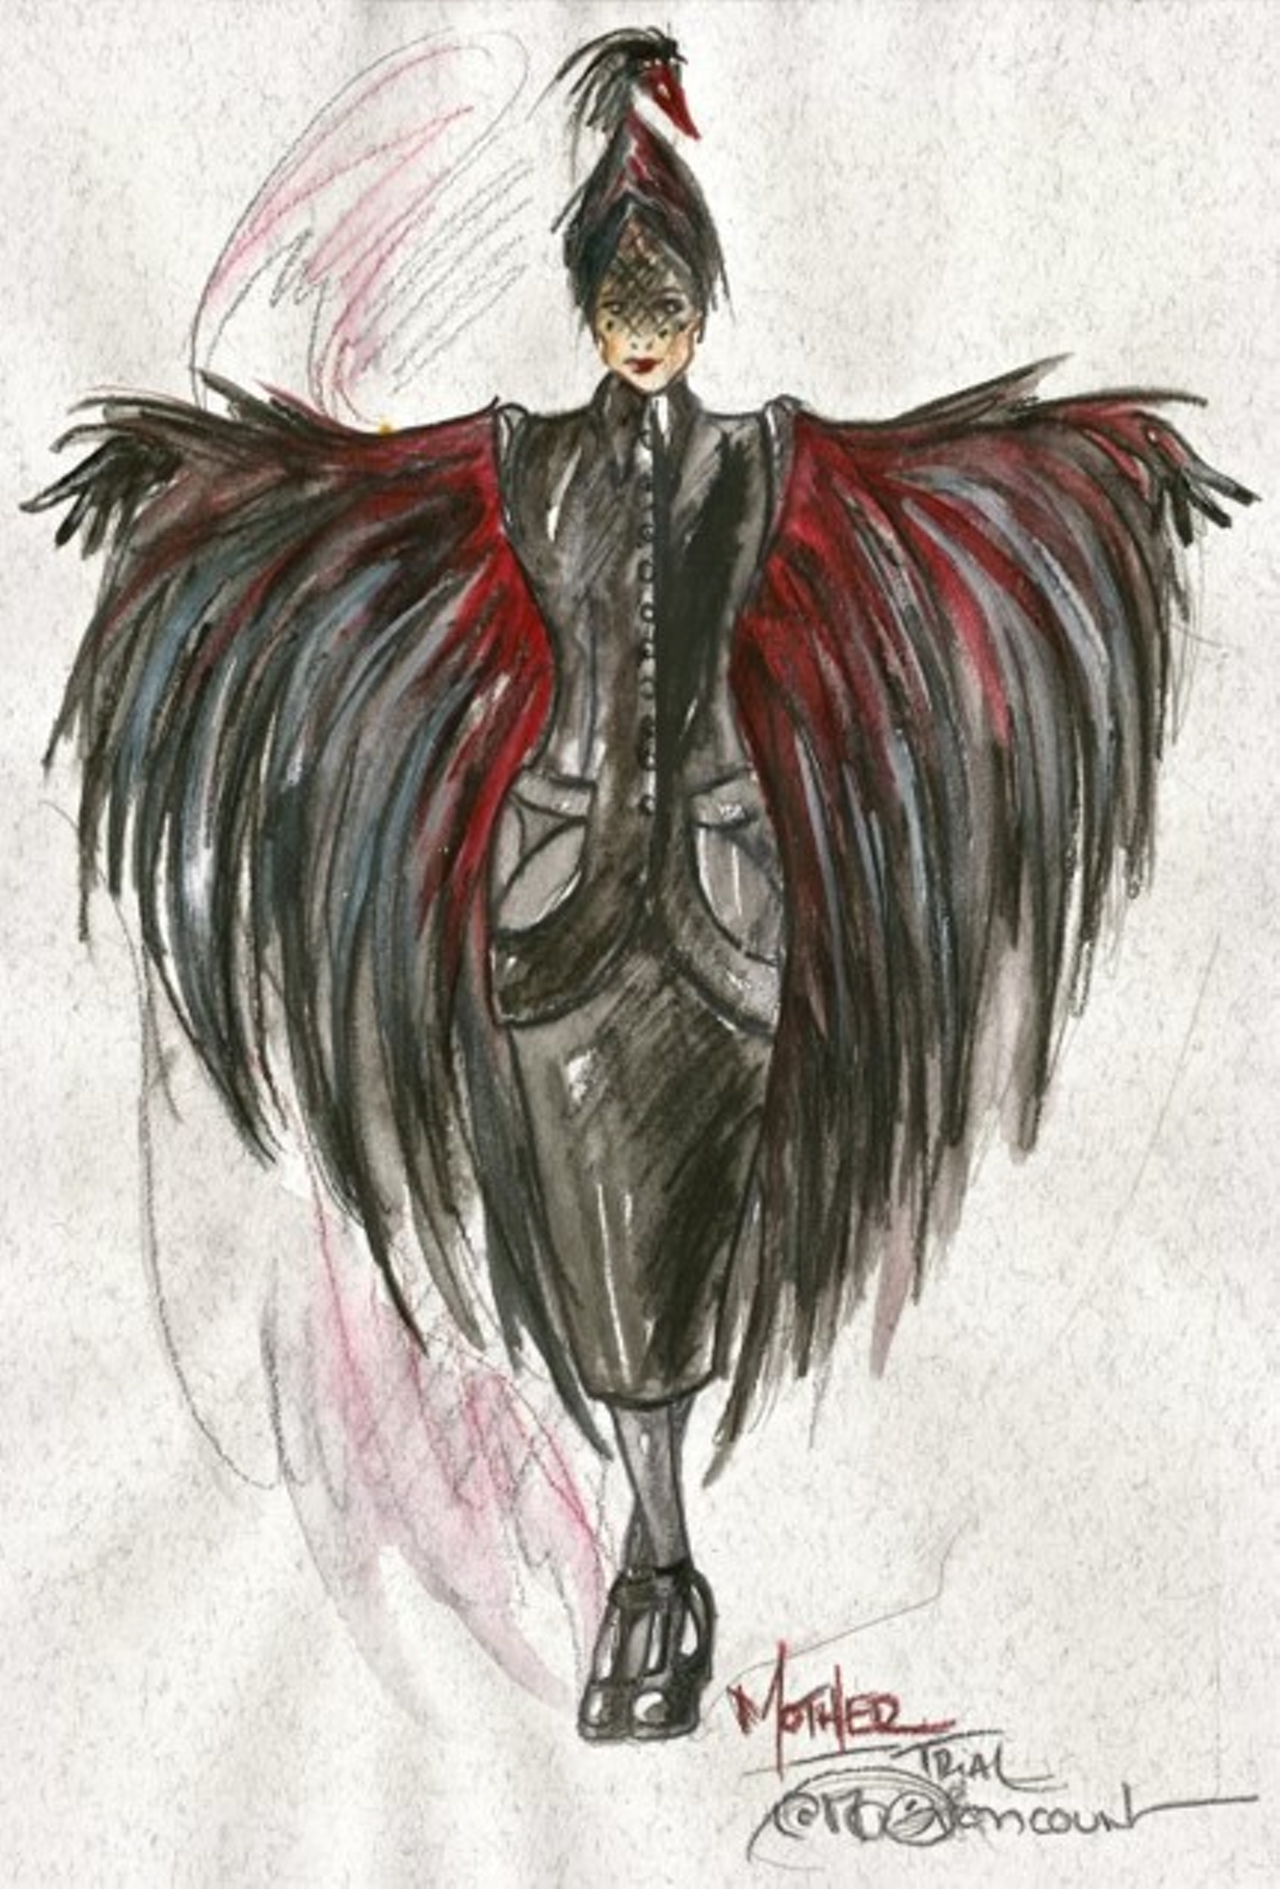 Marie-Chantale Vaillancourt’s costume sketch for the Mother character